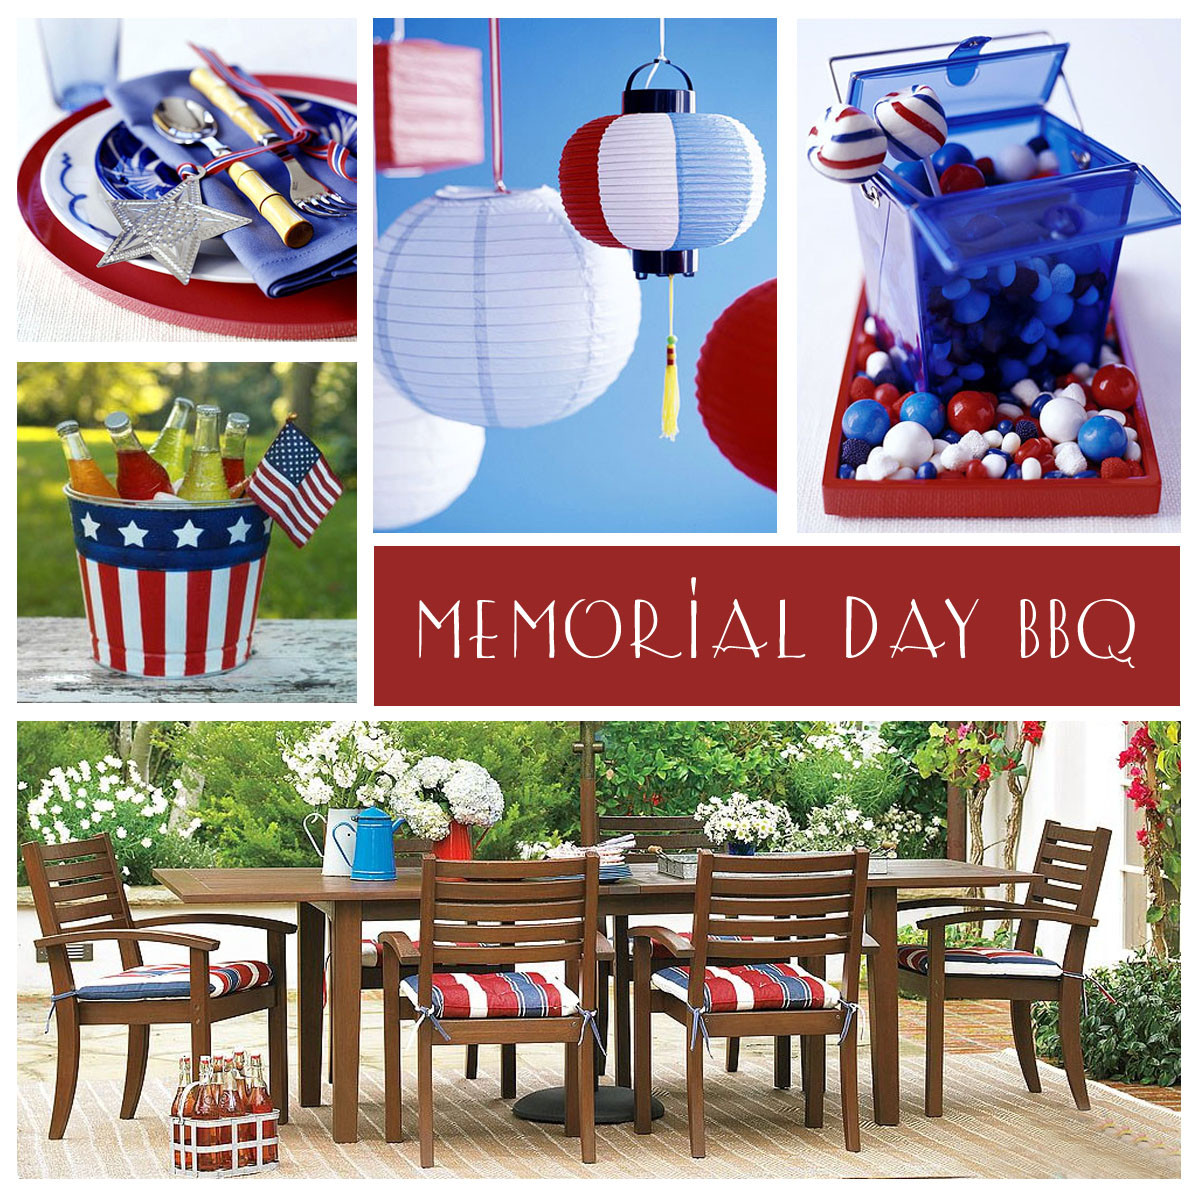 Memorial Day Barbeque Ideas
 Tips And Ideas To Plan A Memorial Day Barbecue by